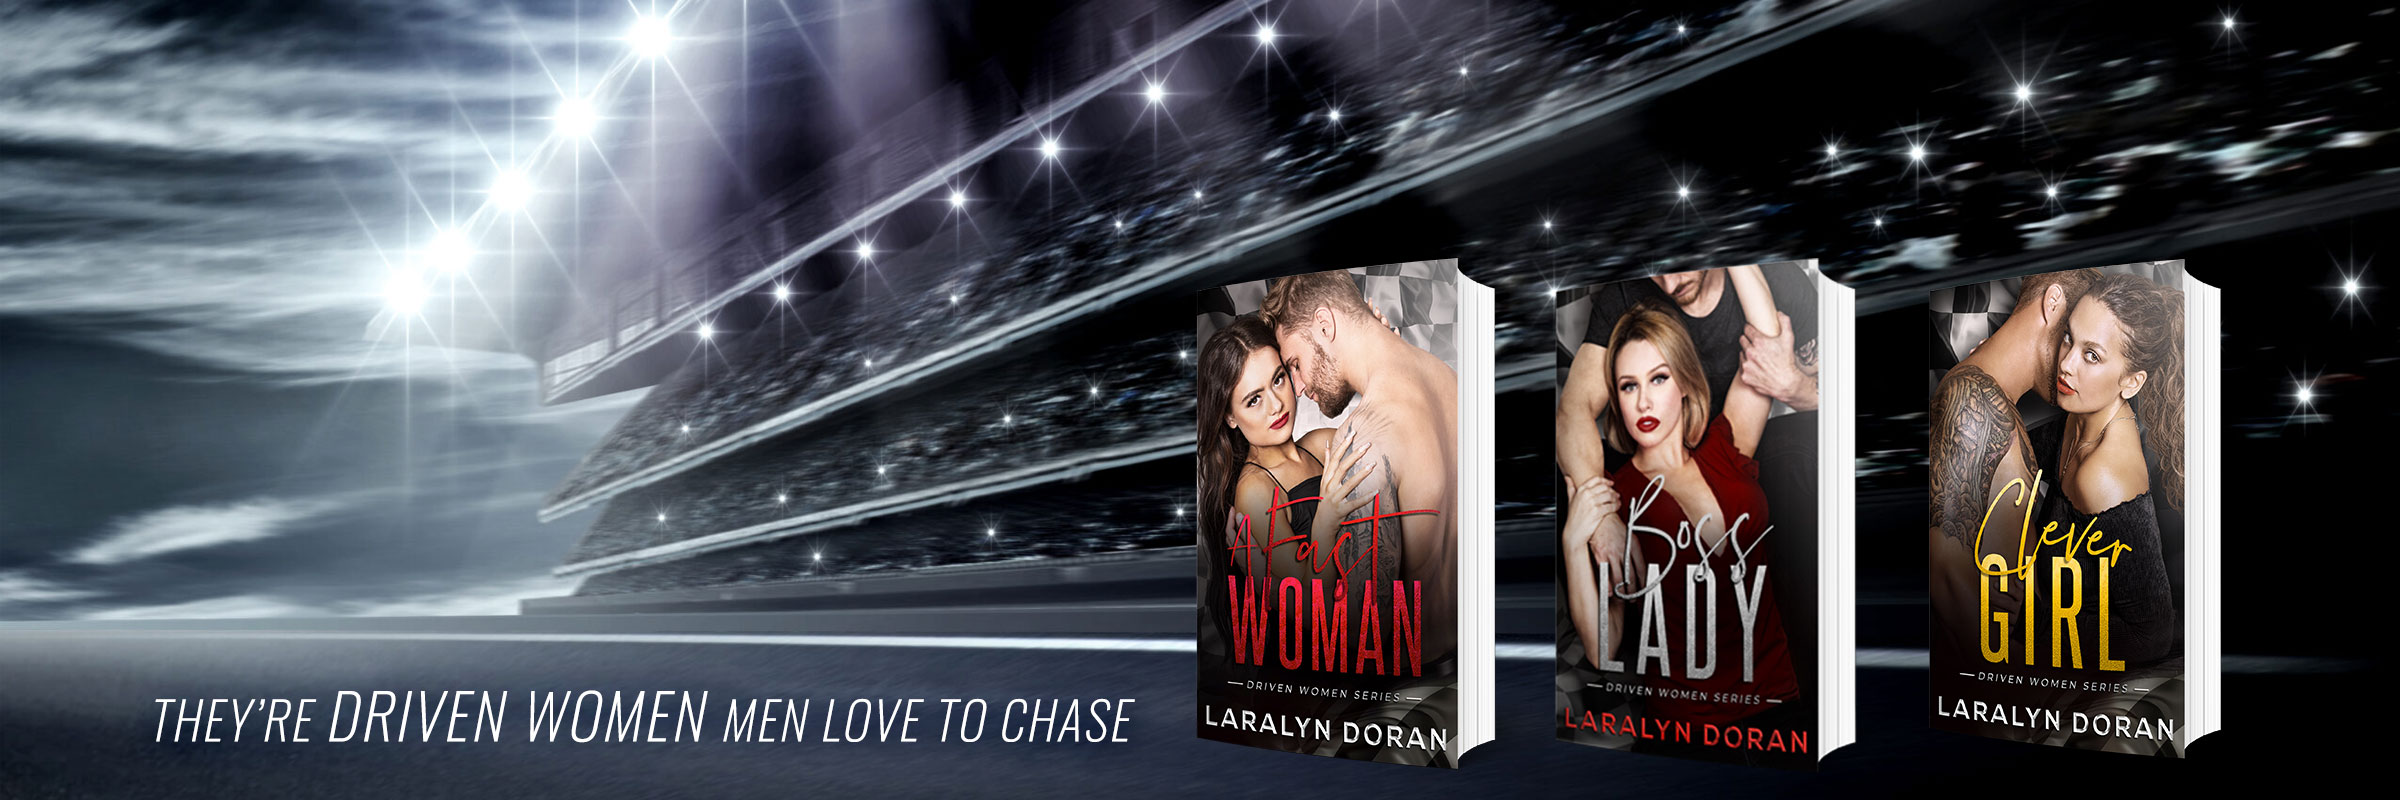 Follow my series about Driven Women Men Love to Chase